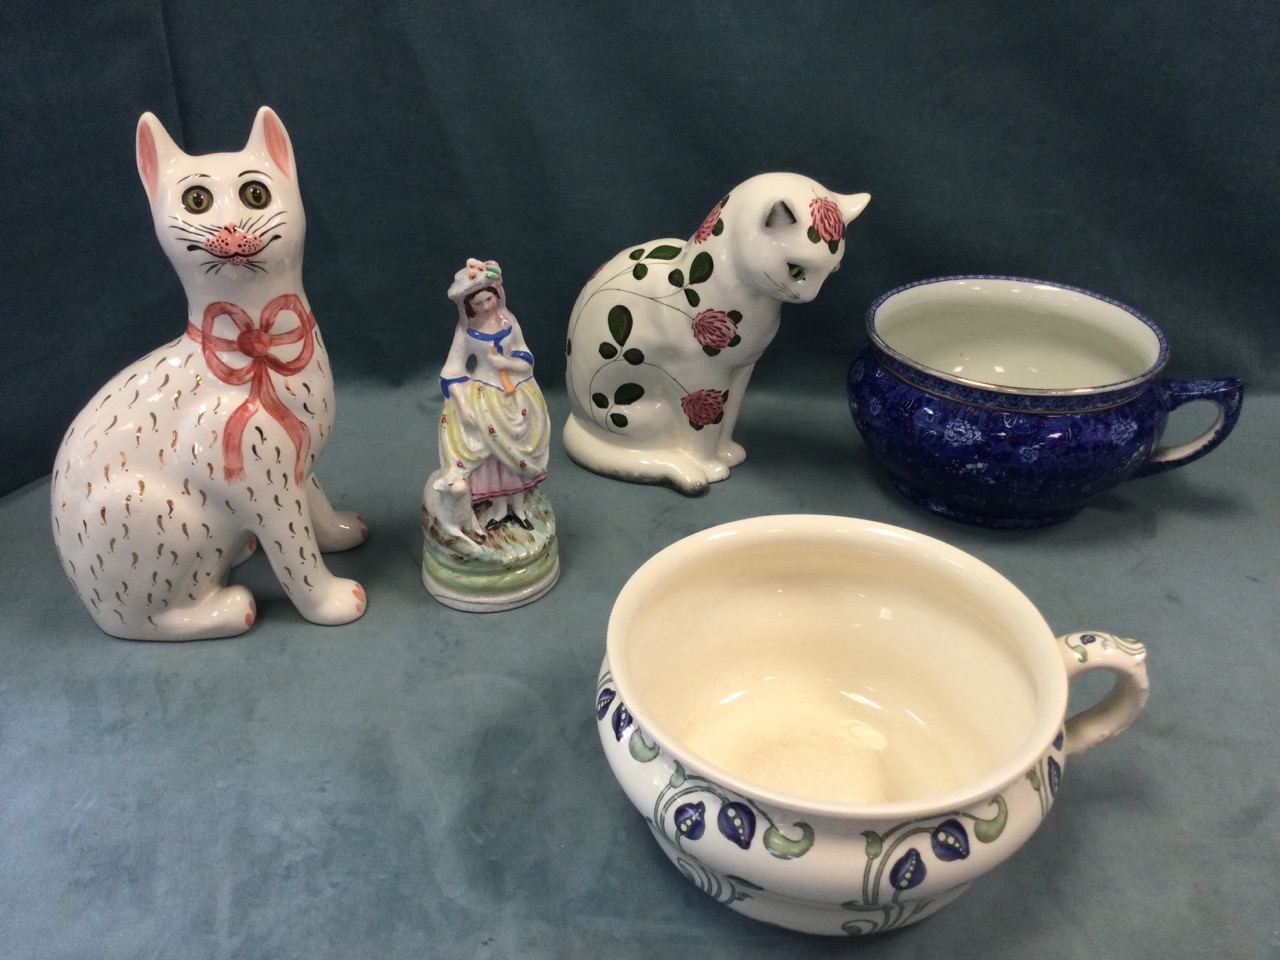 A Plichta ceramic cat set with glass eyes decorated with clover; another cat by the Griselda Hill